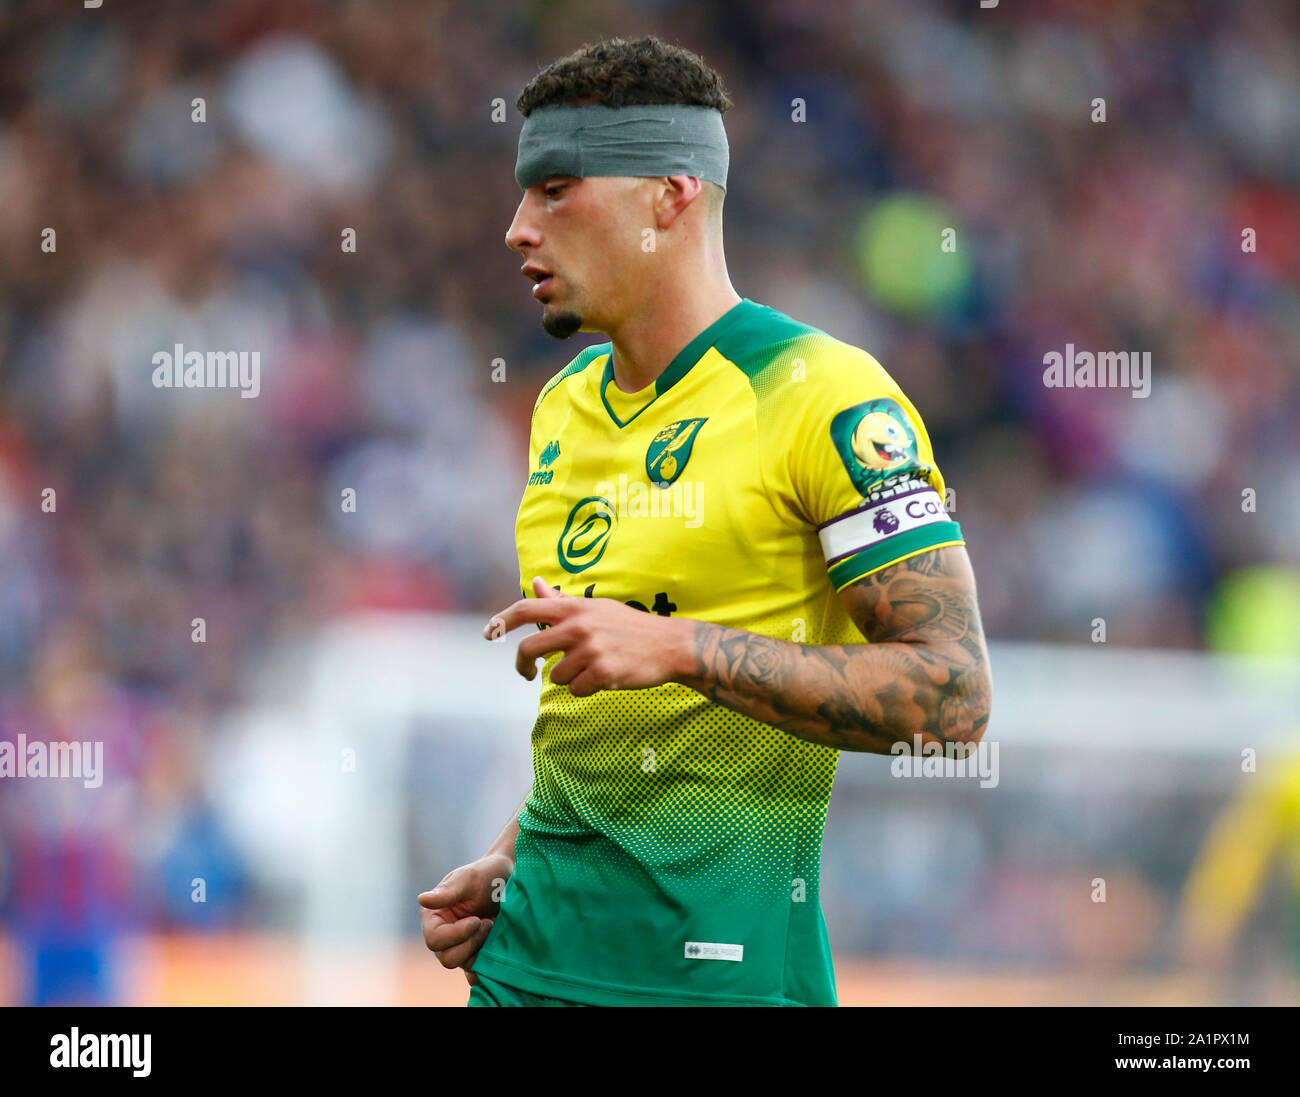 London, UK. 28th Sep, 2019. Norwich City's Ben Godfrey during English Premier League between Crystal Palace and Norwich City at Selhurst Park Stadium, London, England on 28 September 2019 Credit: Action Foto Sport/Alamy Live News Stock Photo